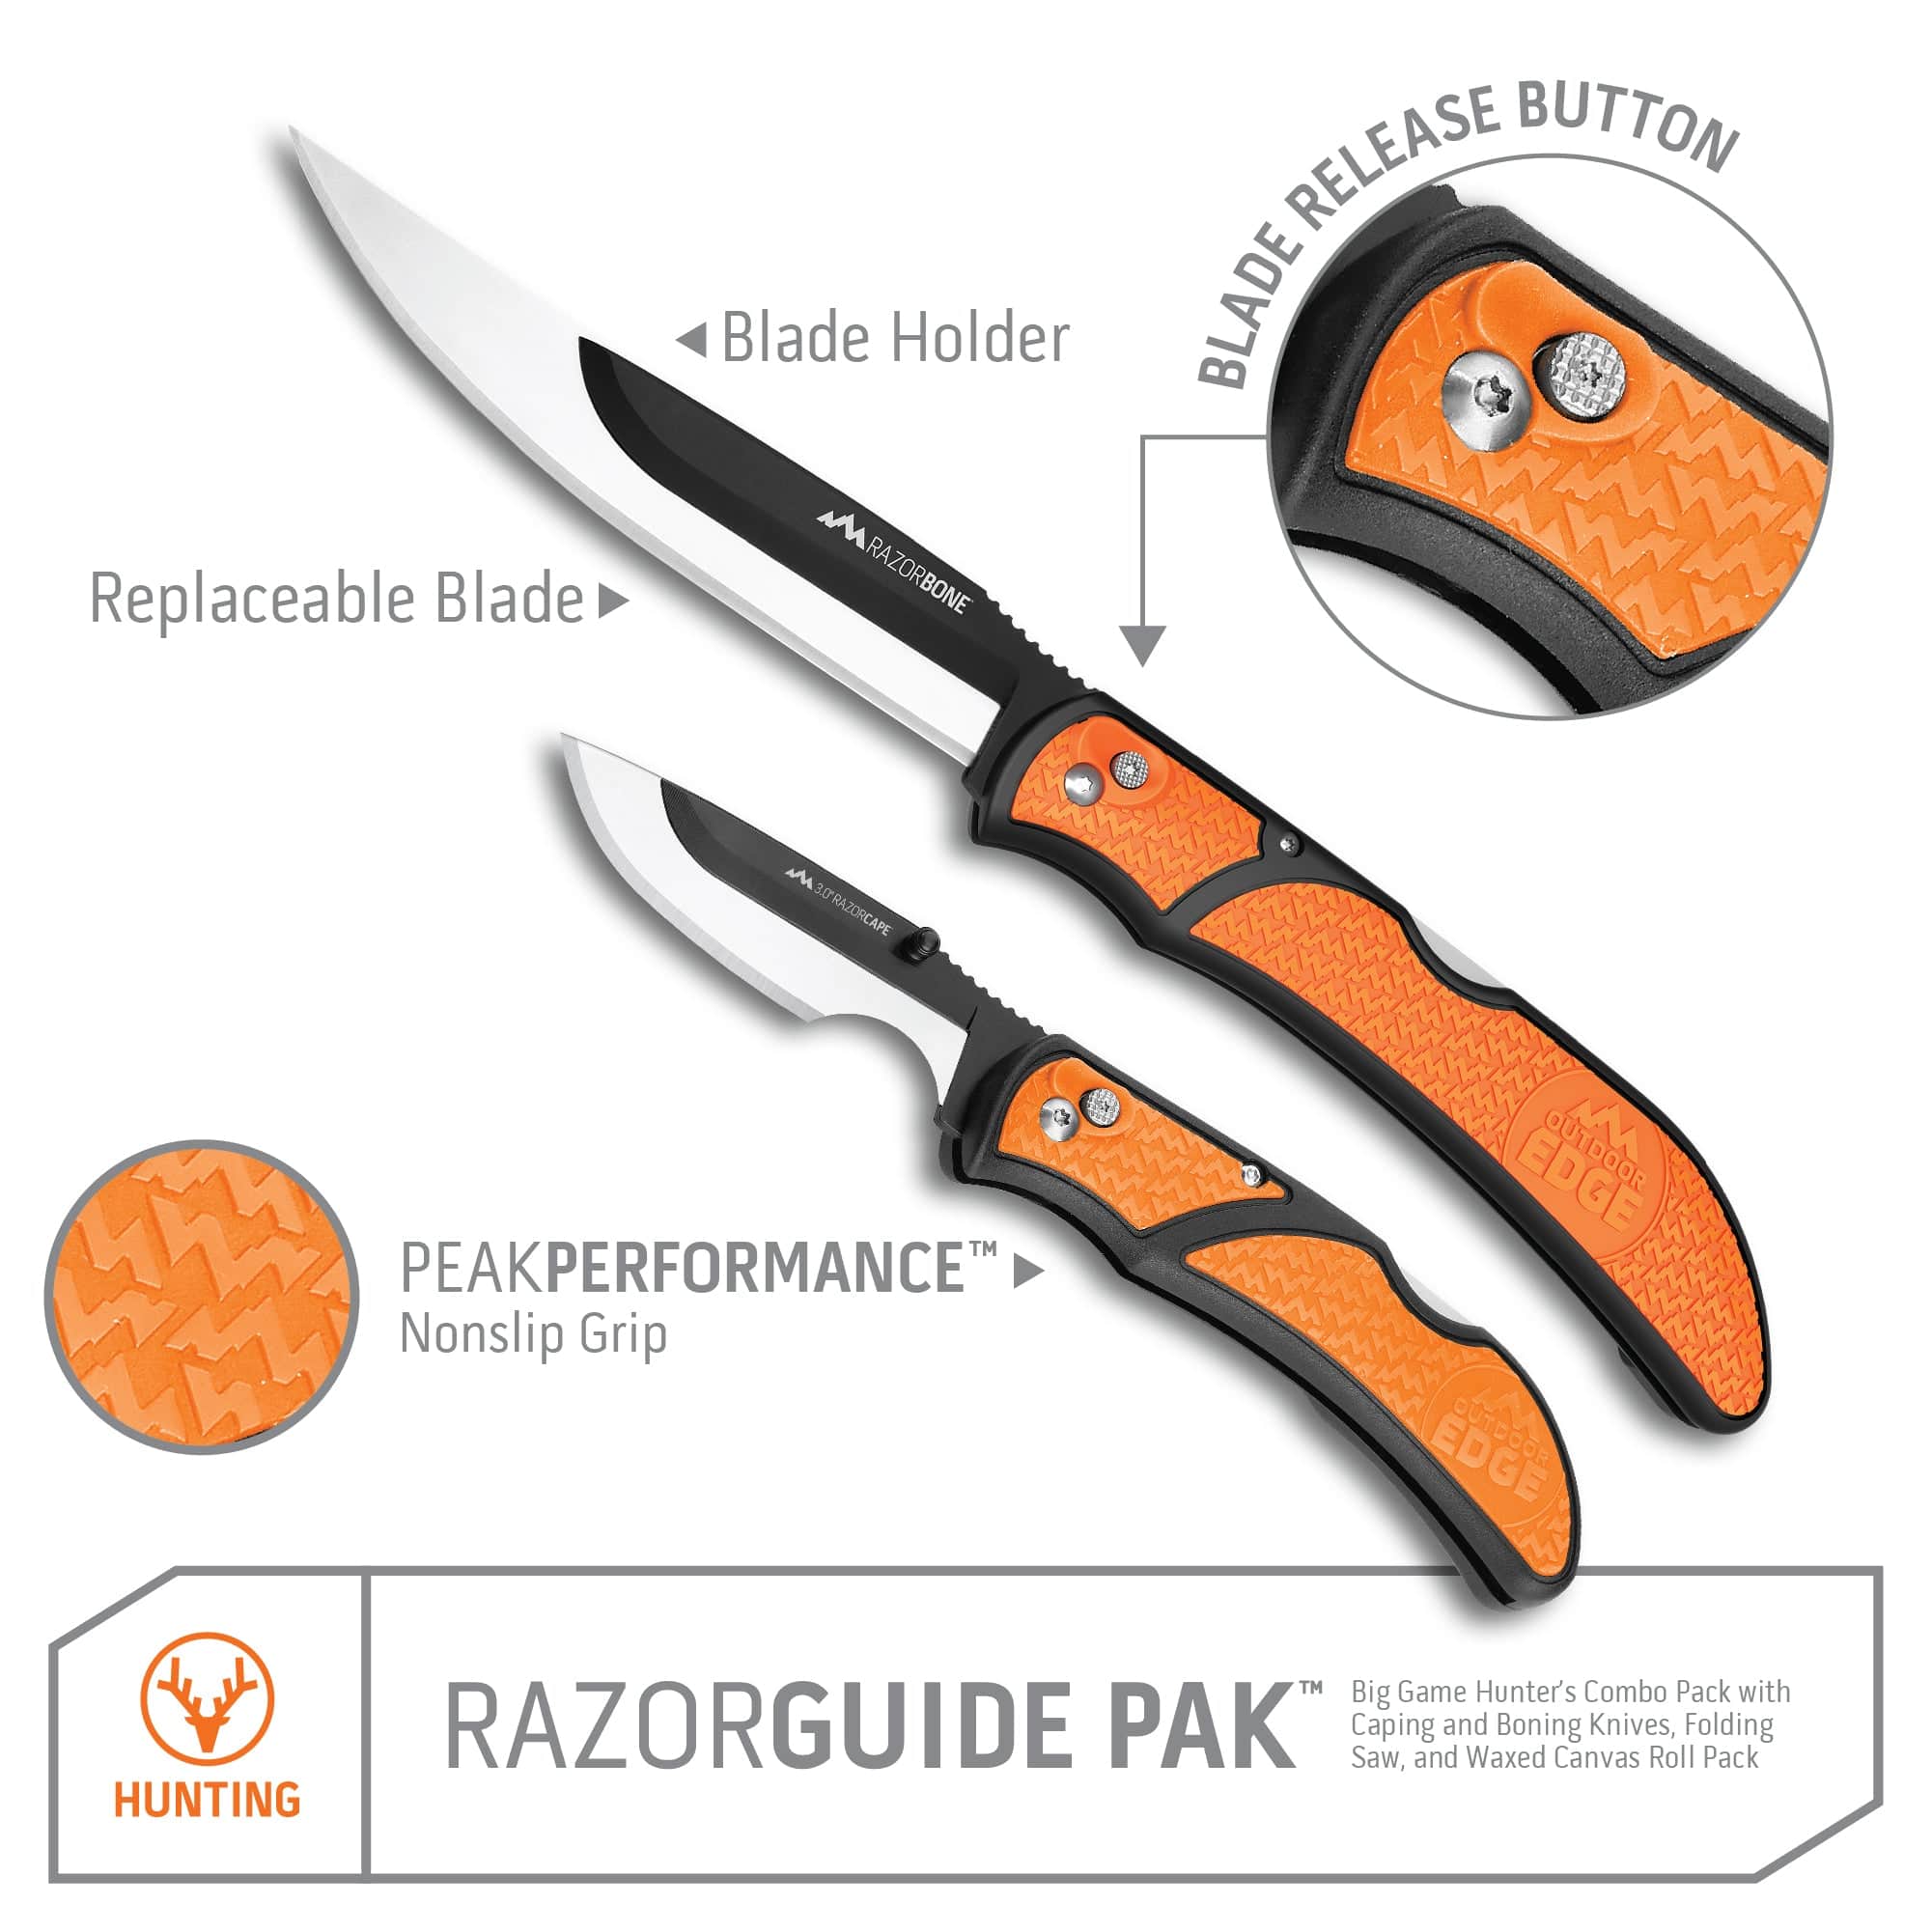 Outdoor Edge RazorGuide Pak with callouts for grip and replaceable blade